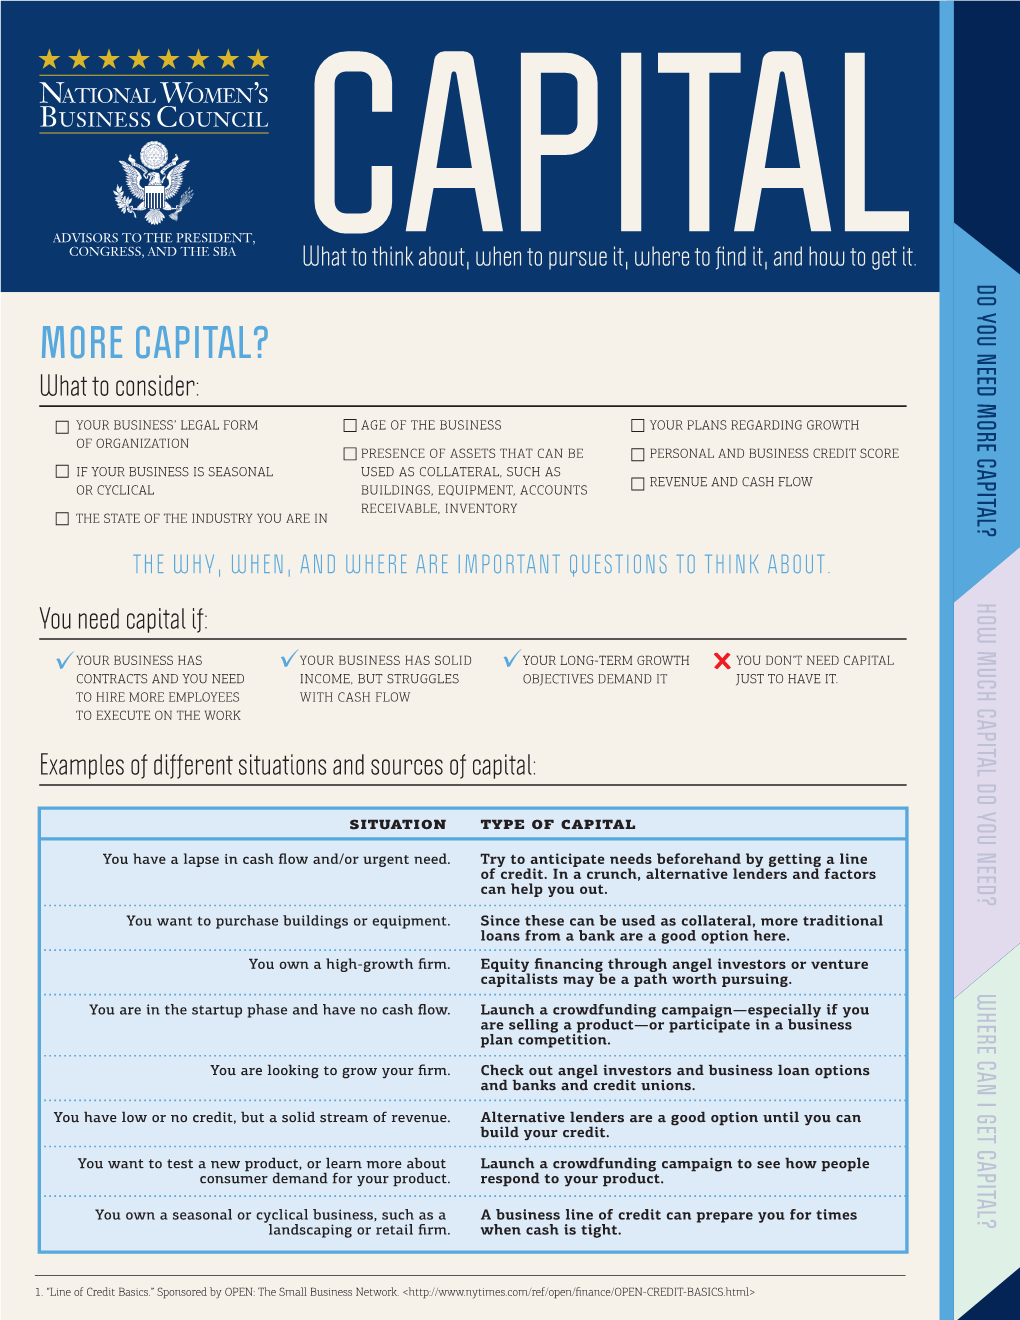 MORE CAPITAL? MORE CAPITAL? What to Consider